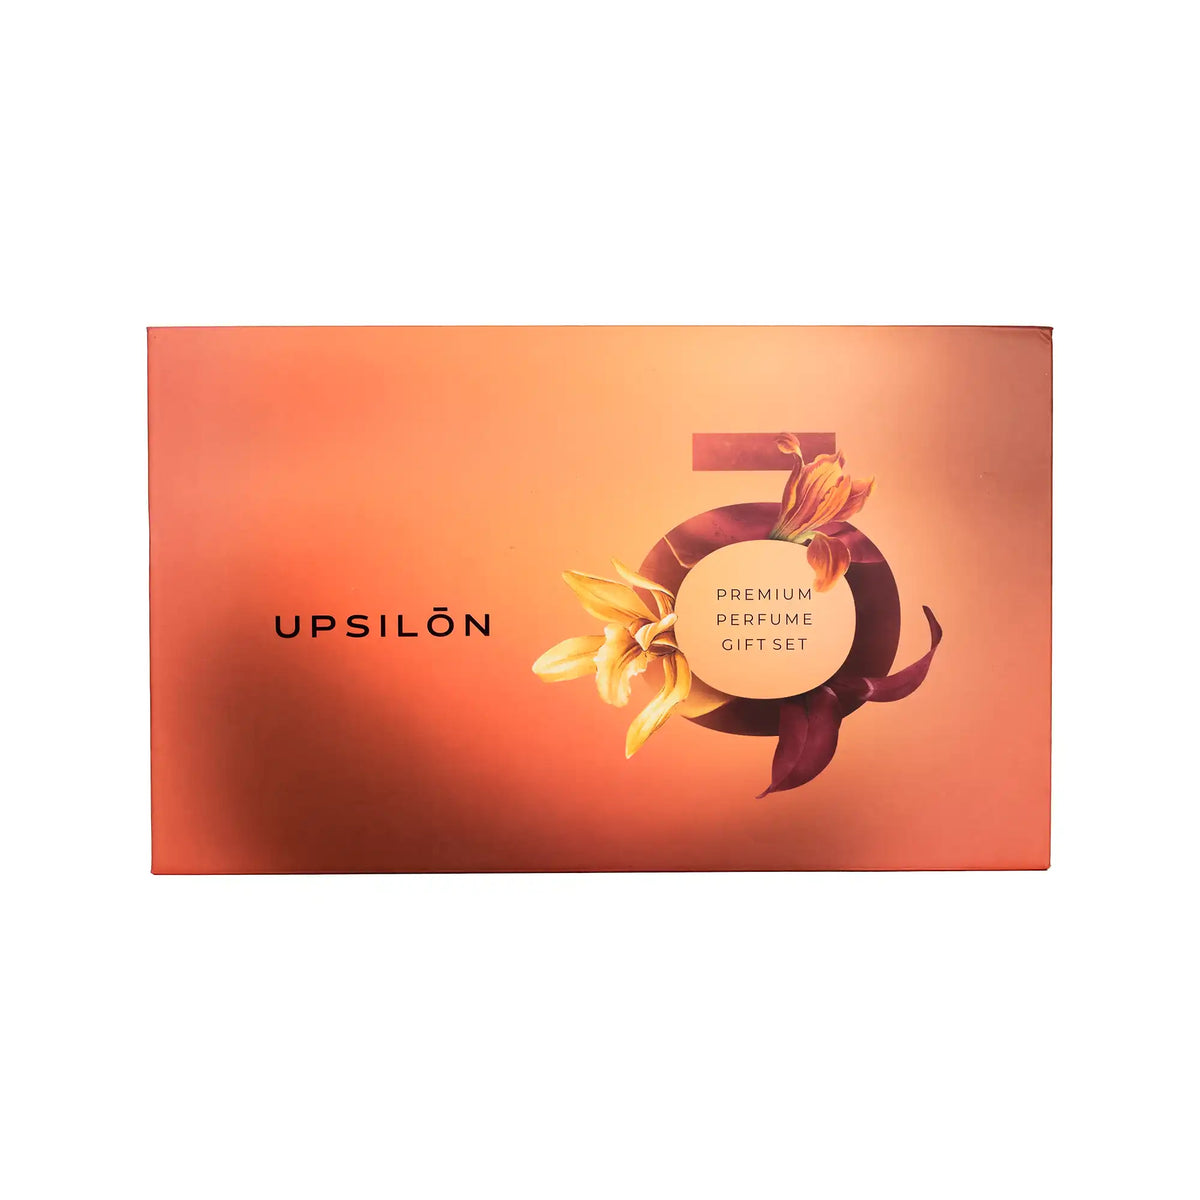 Shop the Upsilon Premium Perfume Gift Set and experience the ultimate in olfactory luxury